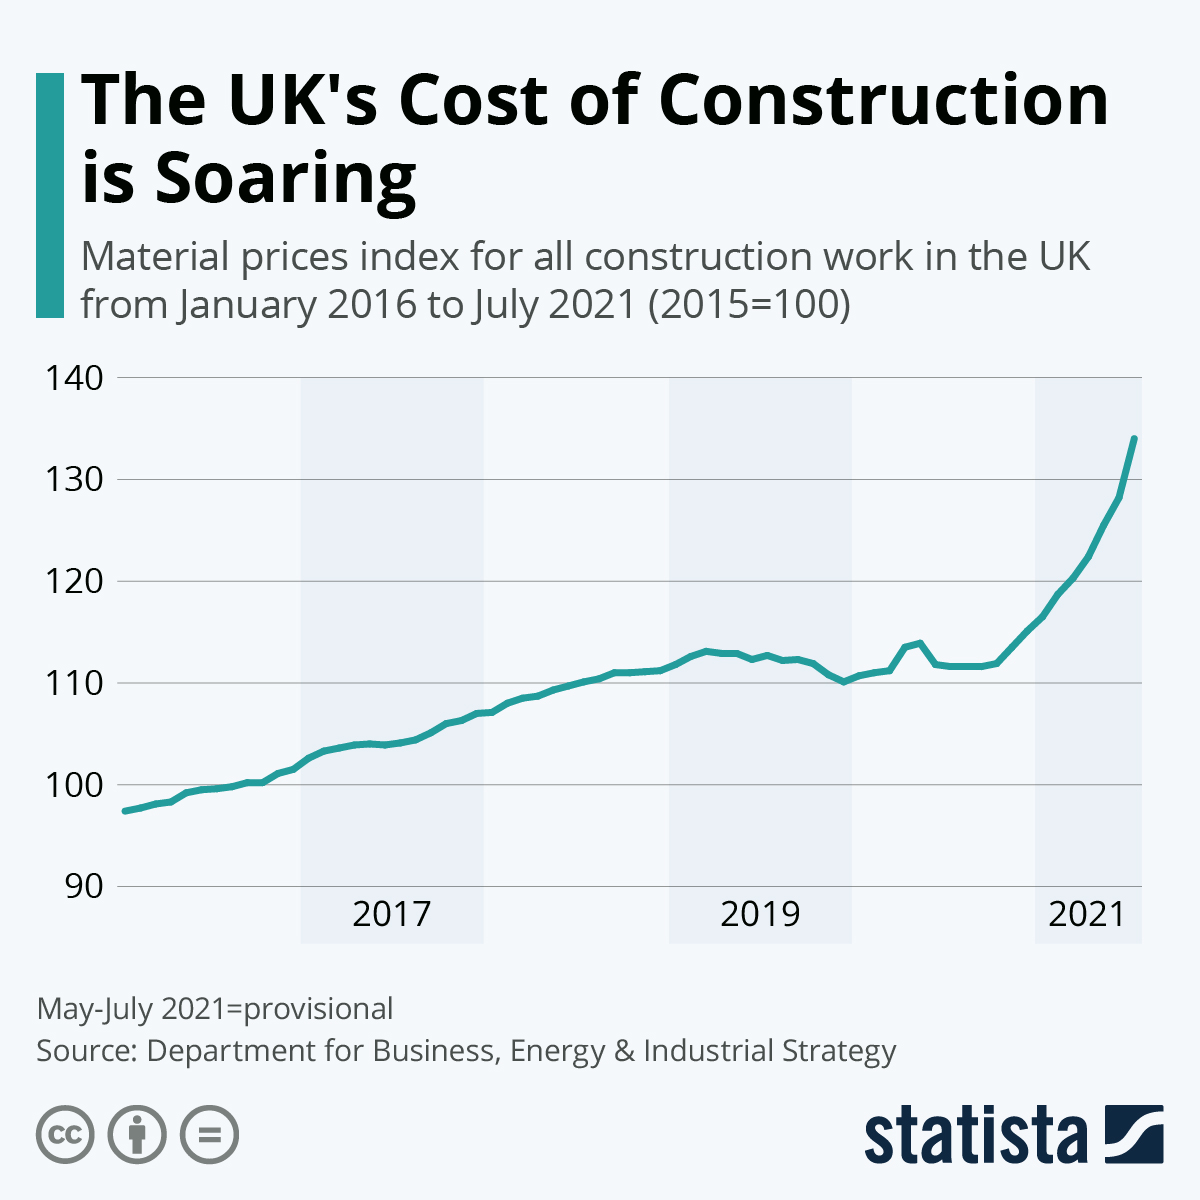 The UK's Cost of Construction is Soaring